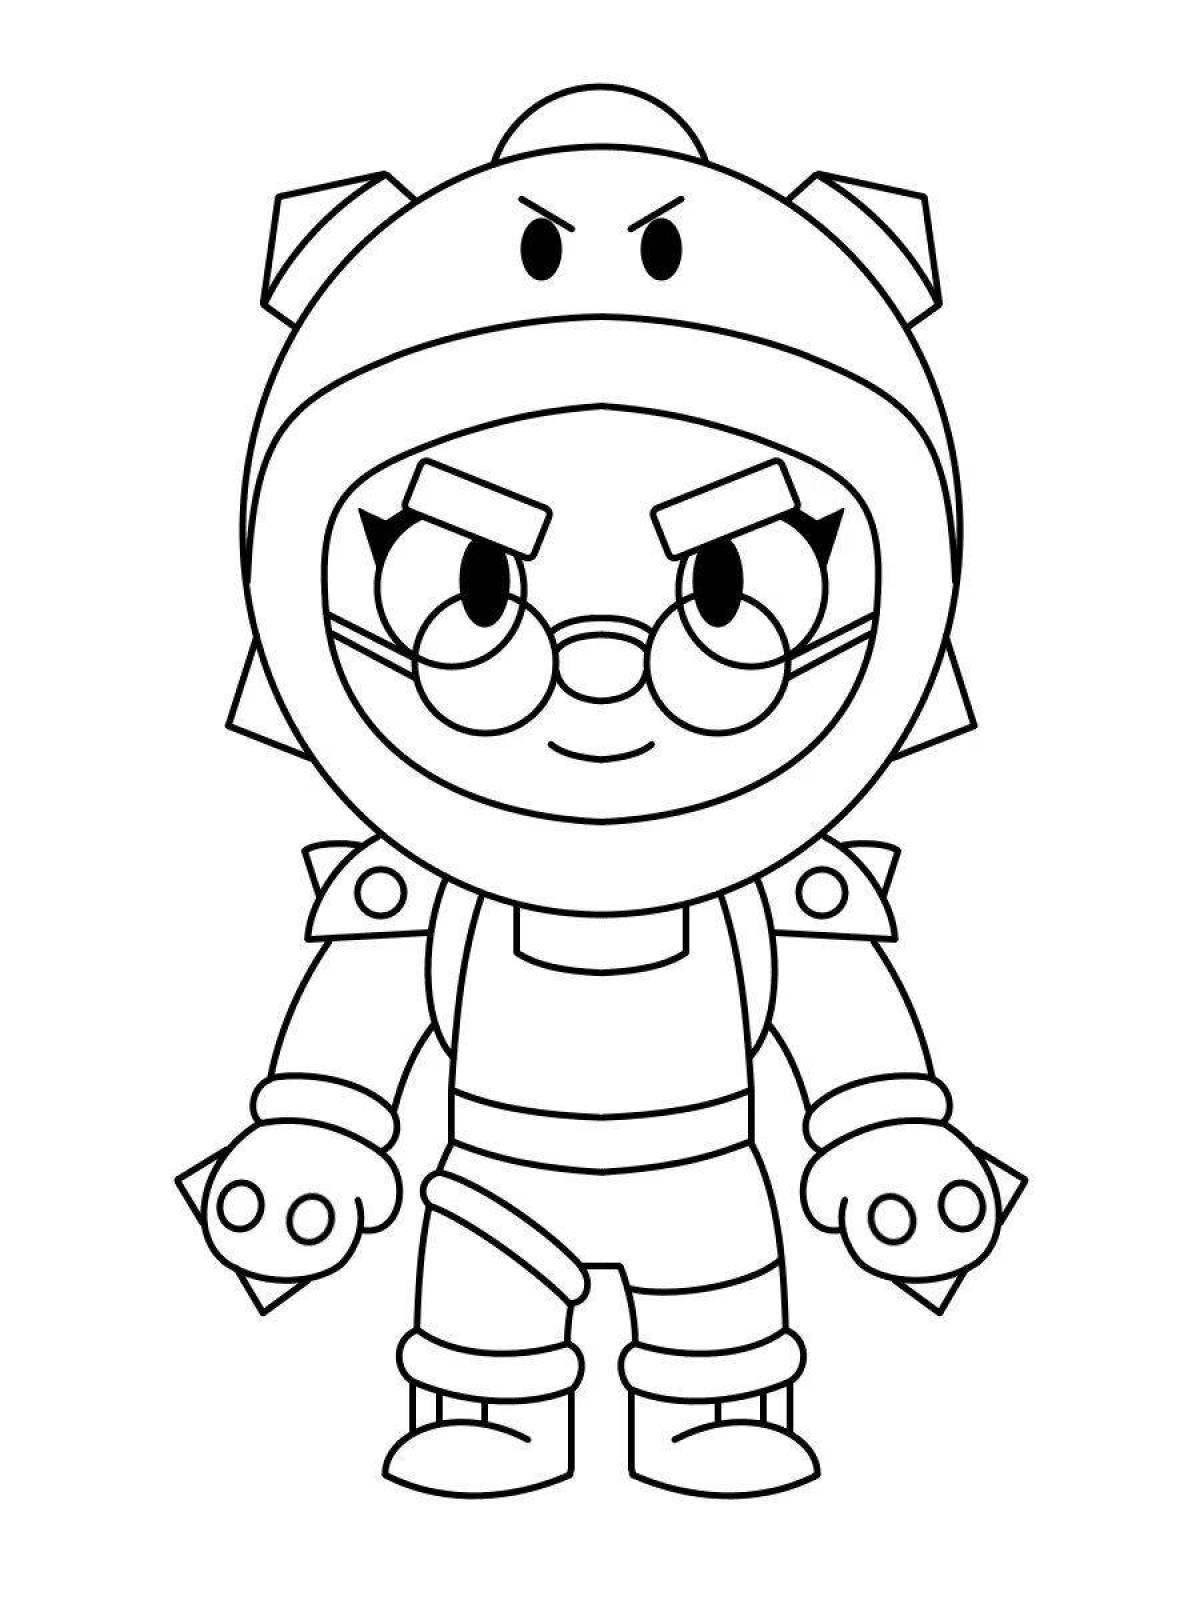 Blavar stars coloring page with bright colors